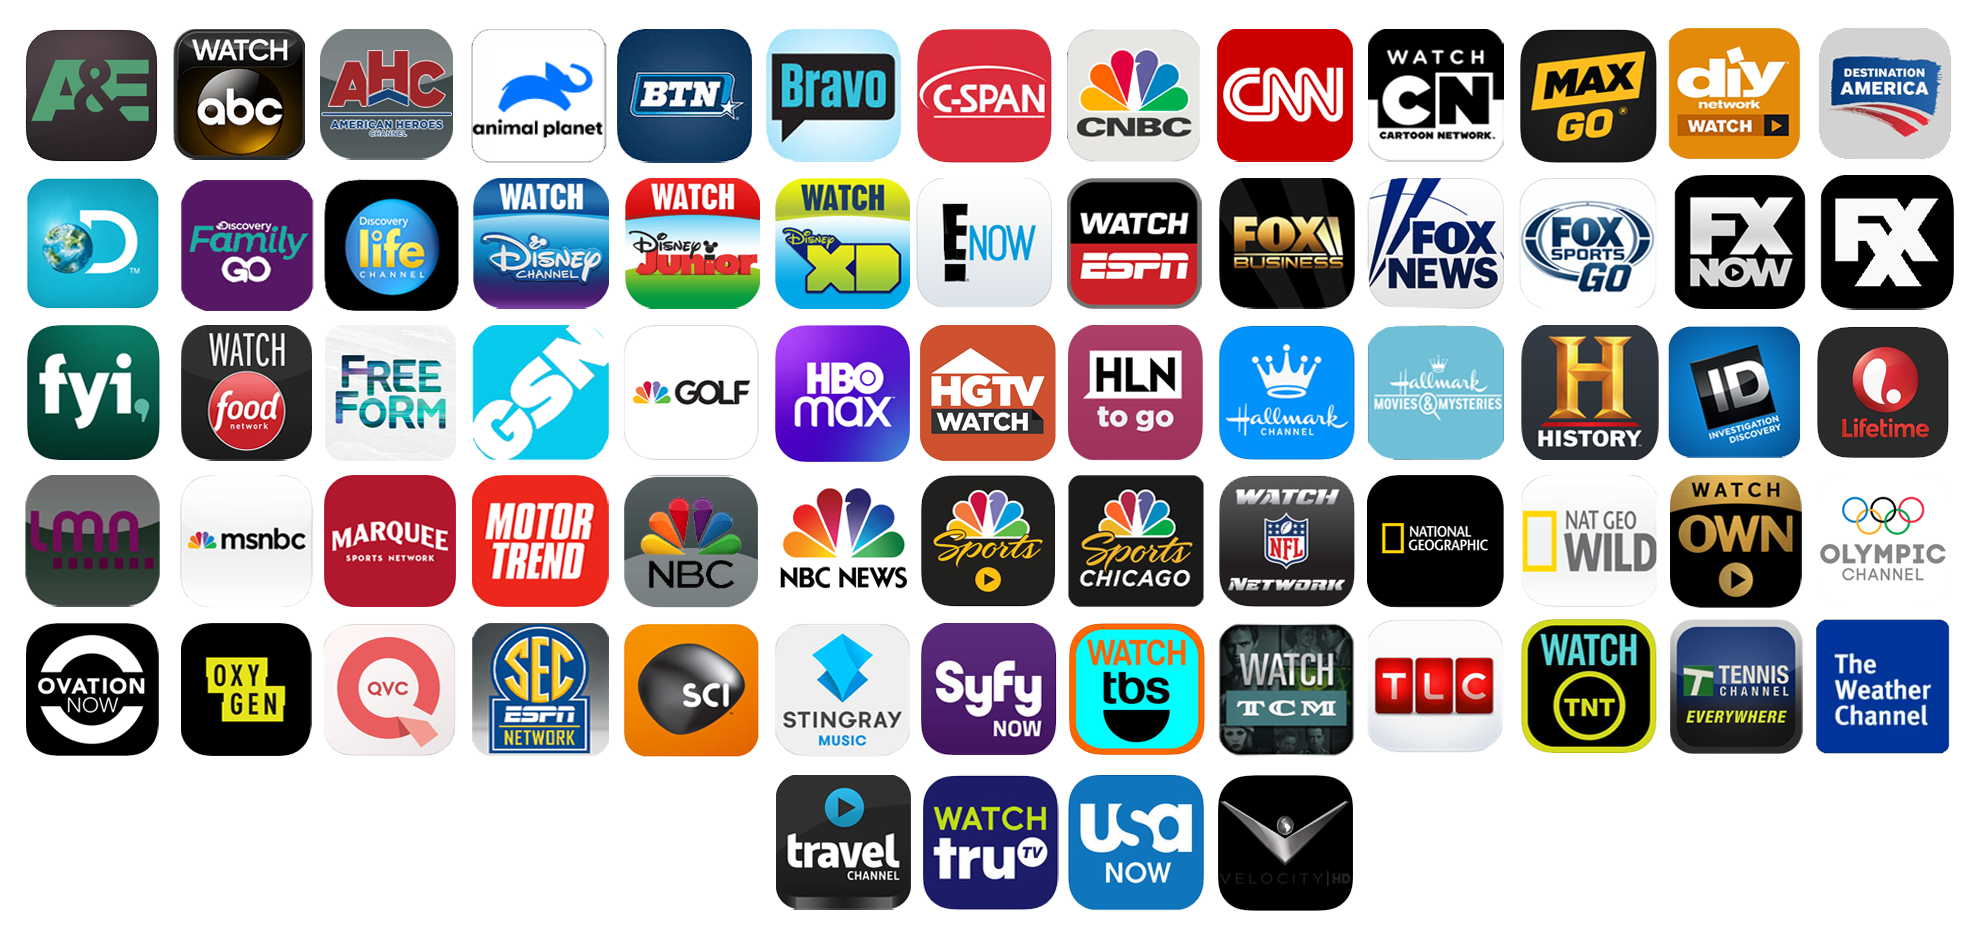 Residential Cable TV Options